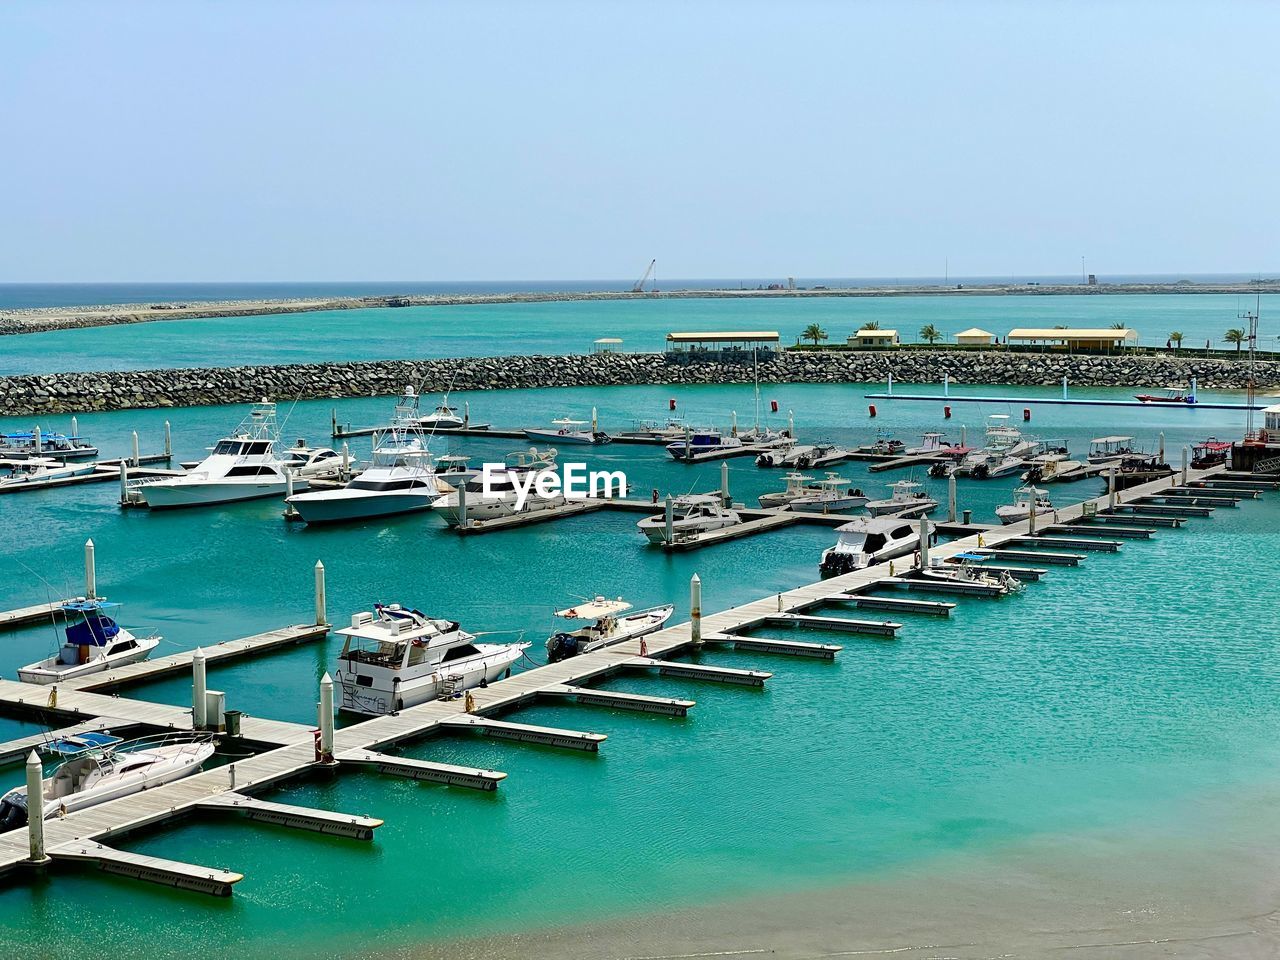 water, sea, marina, dock, nautical vessel, sky, nature, land, transportation, beach, bay, no people, coast, day, blue, clear sky, scenics - nature, beauty in nature, horizon over water, pier, vacation, ocean, moored, shore, port, tranquility, horizon, travel destinations, tranquil scene, mode of transportation, harbor, travel, turquoise colored, outdoors, vehicle, body of water, in a row, idyllic, sunny, high angle view, architecture, sunlight